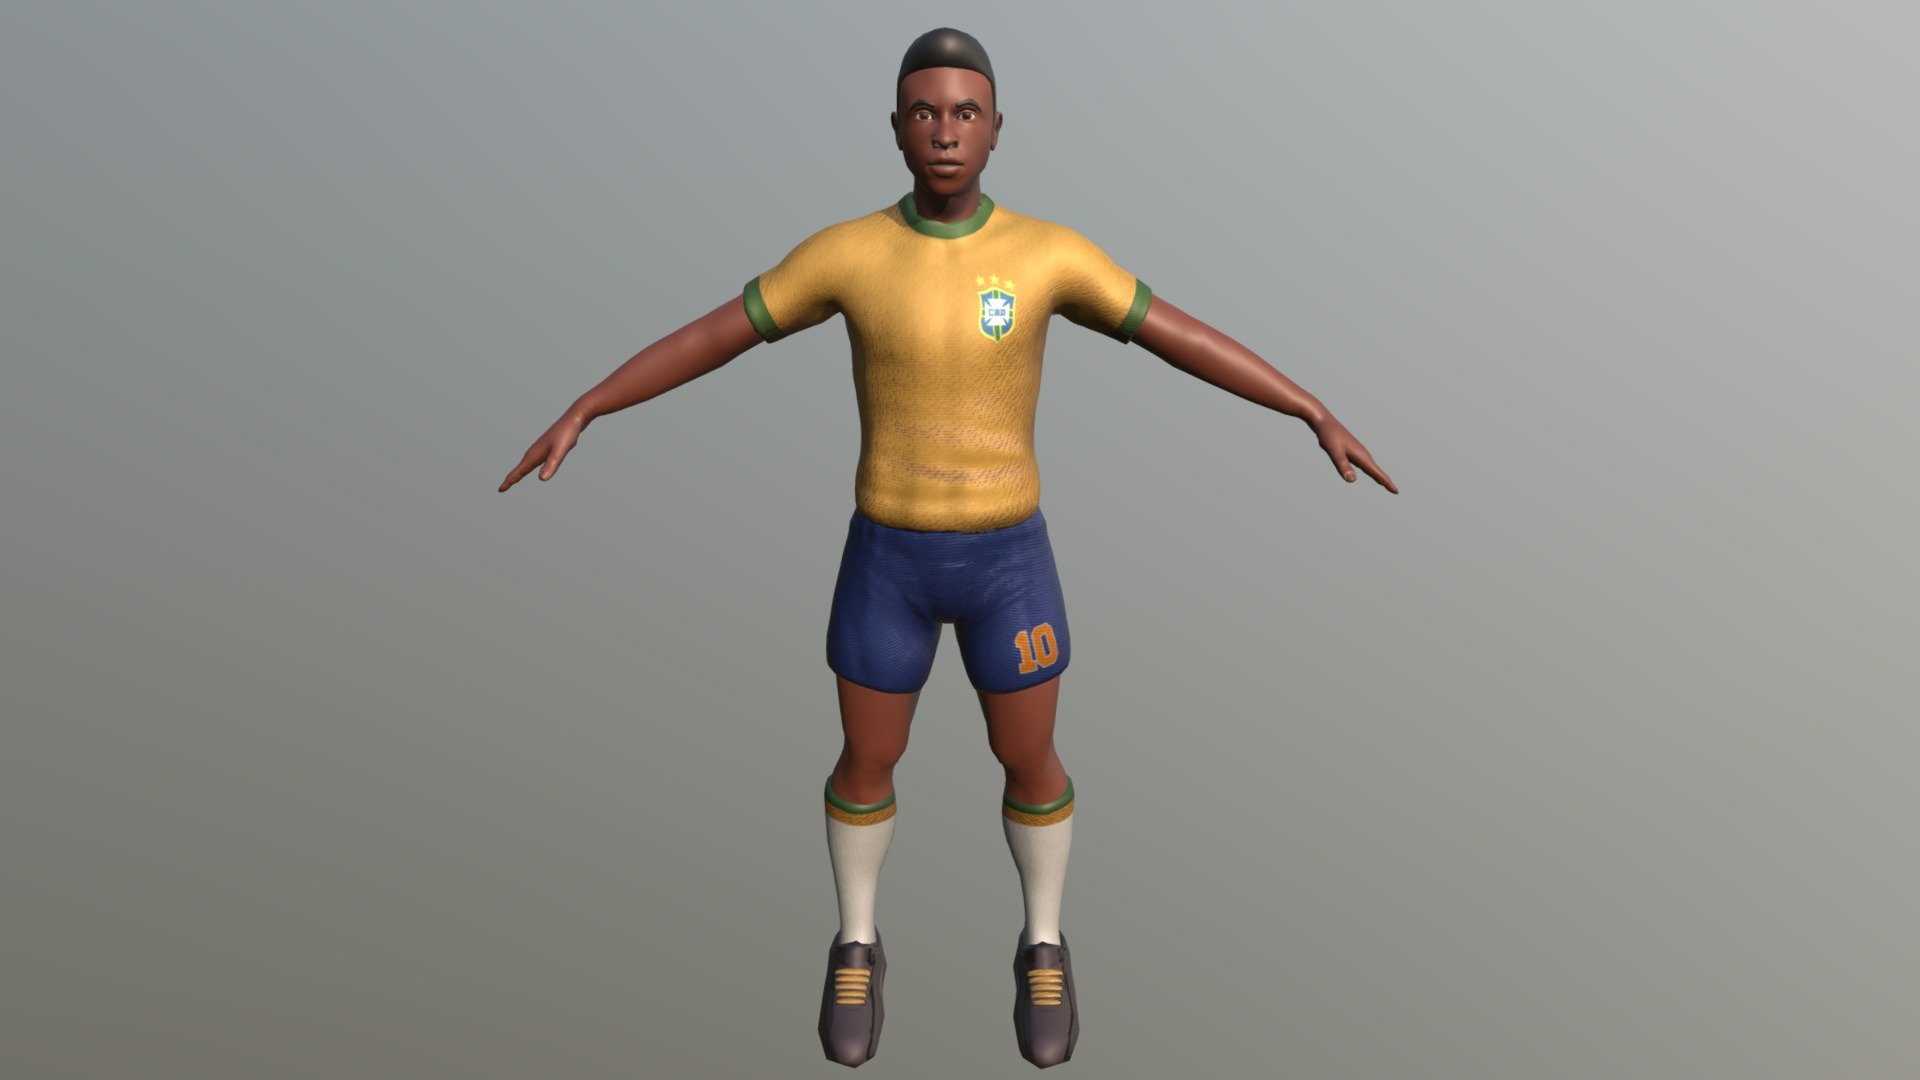 pelé the best player in the world in 3d cartoon, character made in blender 3d model